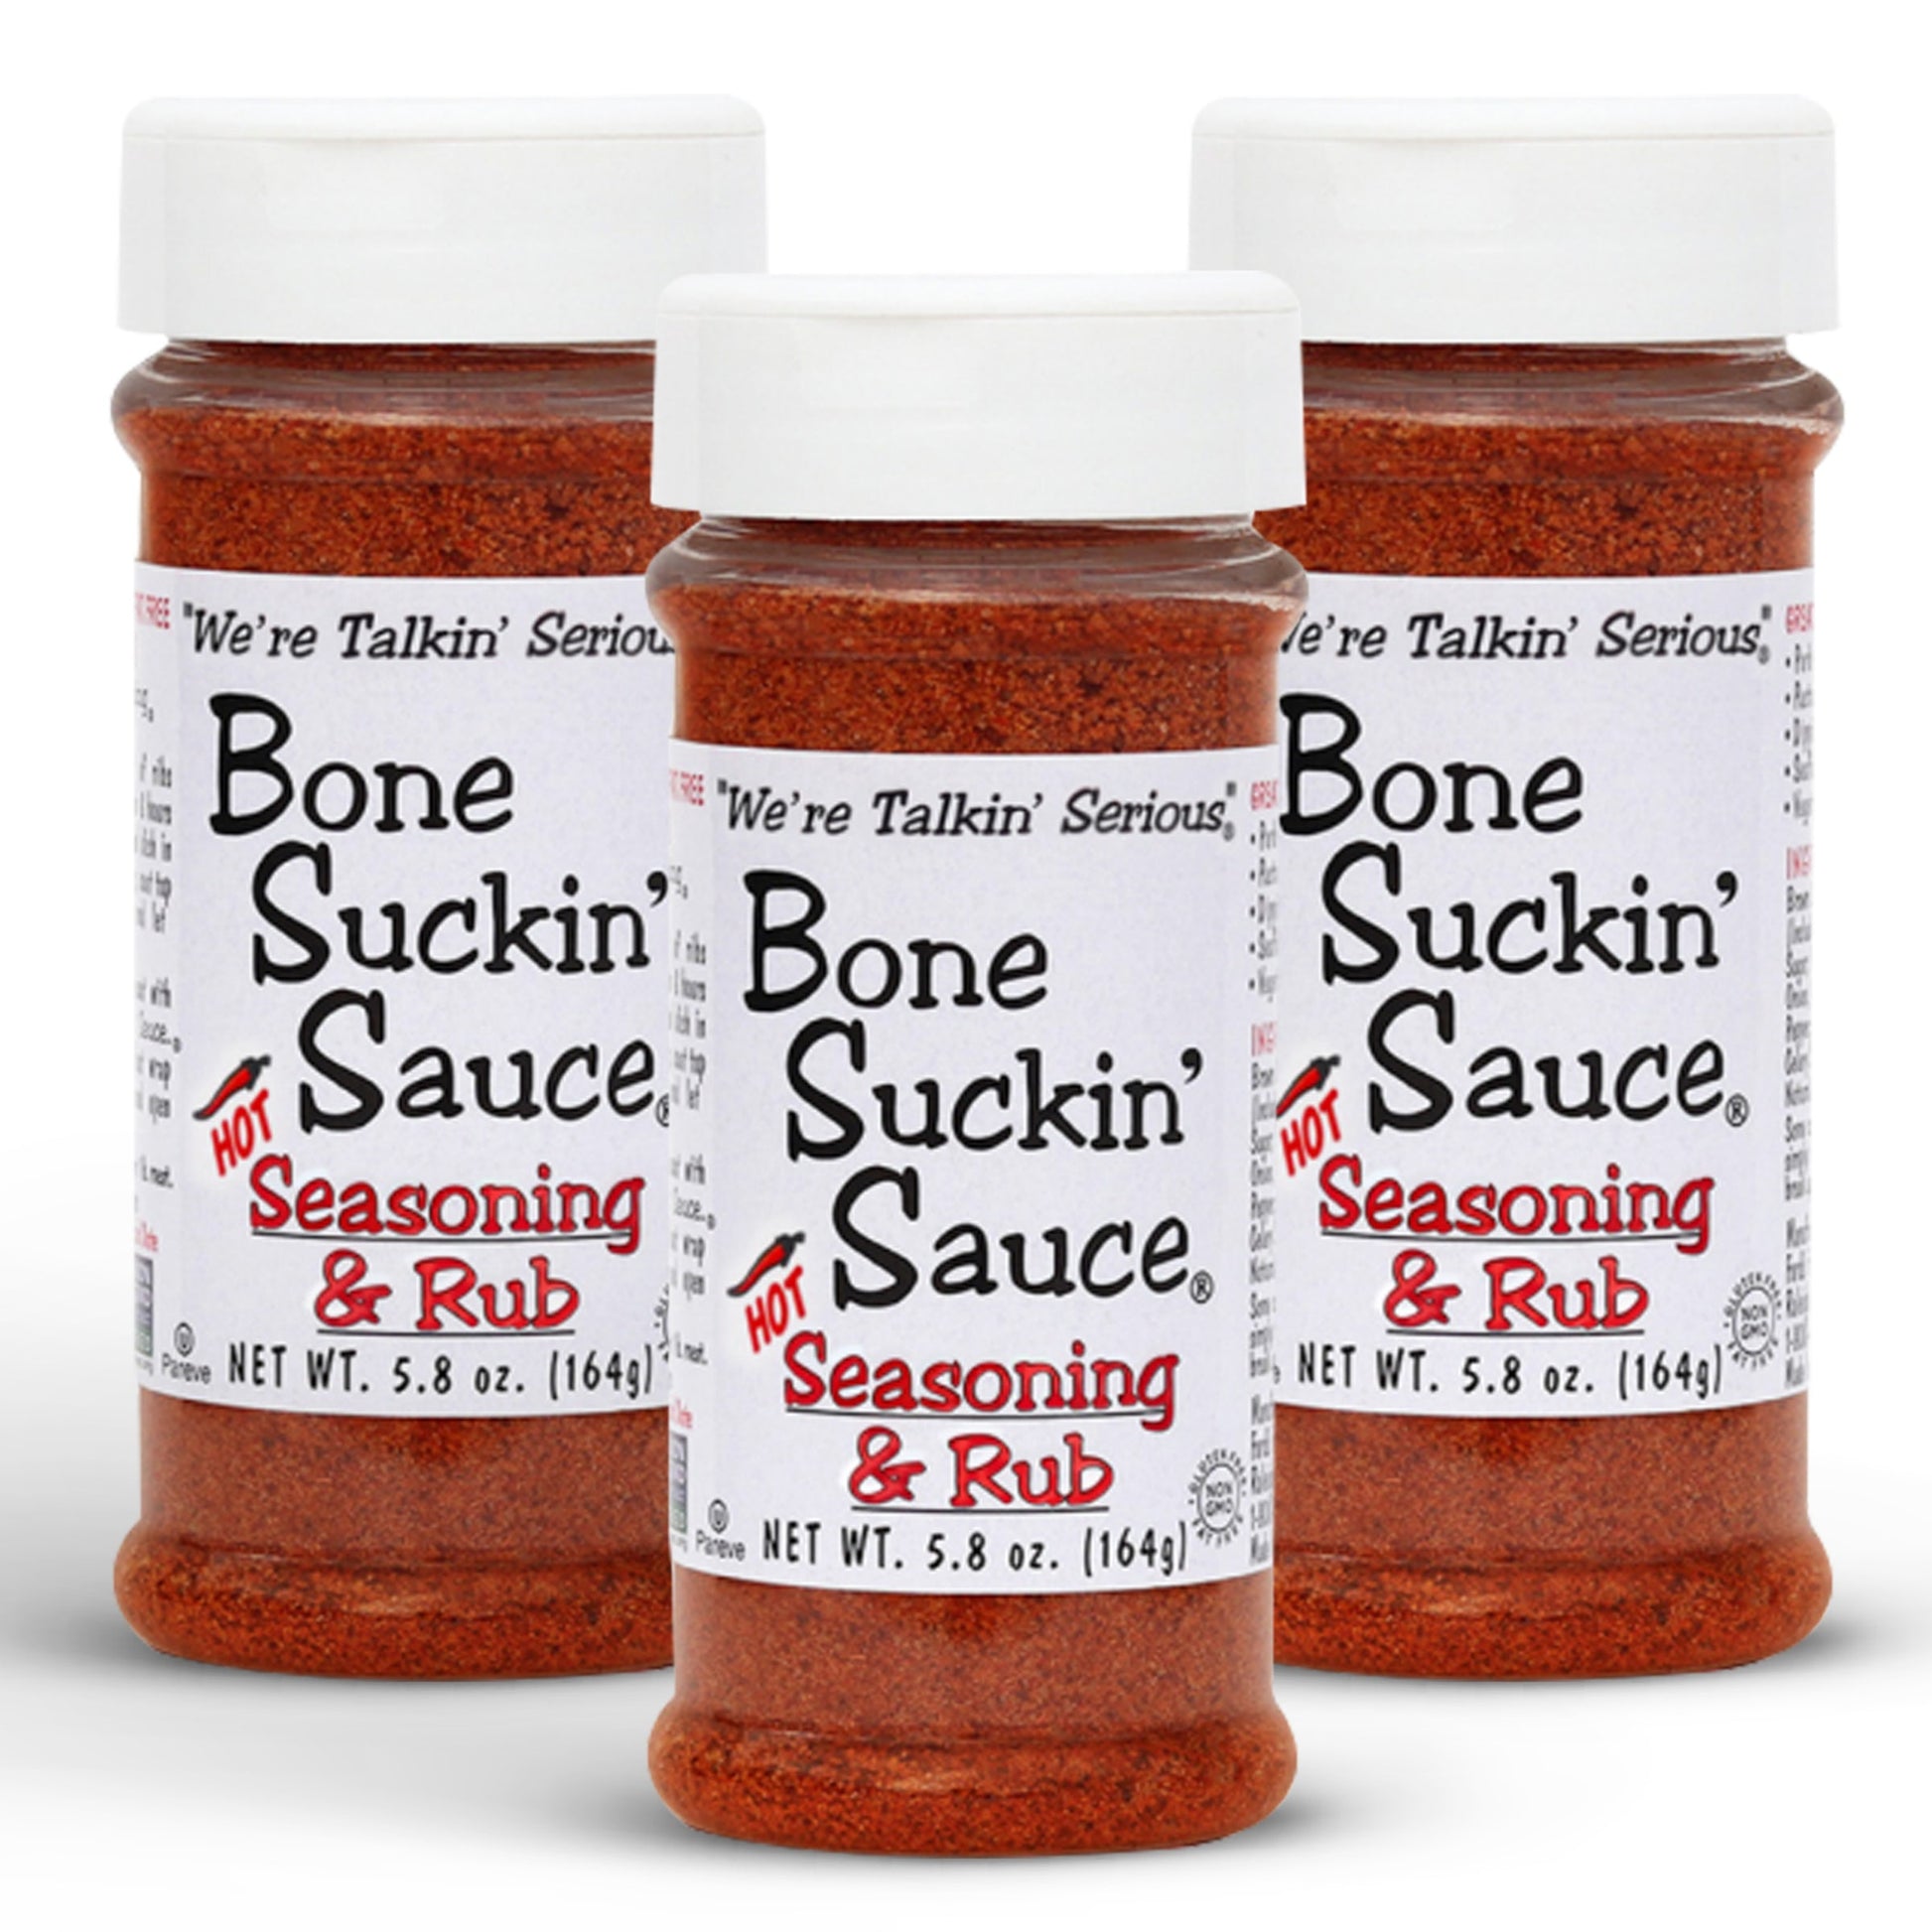 Bone Suckin’® Hot Seasoning & Rub, 5.8 oz. A cayenne kick is the perfect addition to the proprietary blend of brown sugar, paprika, garlic and spices in the original. This perfect combination of spicy, salty and sweet brings just the right amount of heat to this versatile product. Everyone can enjoy that same great flavor with a little extra spice. 3 pack